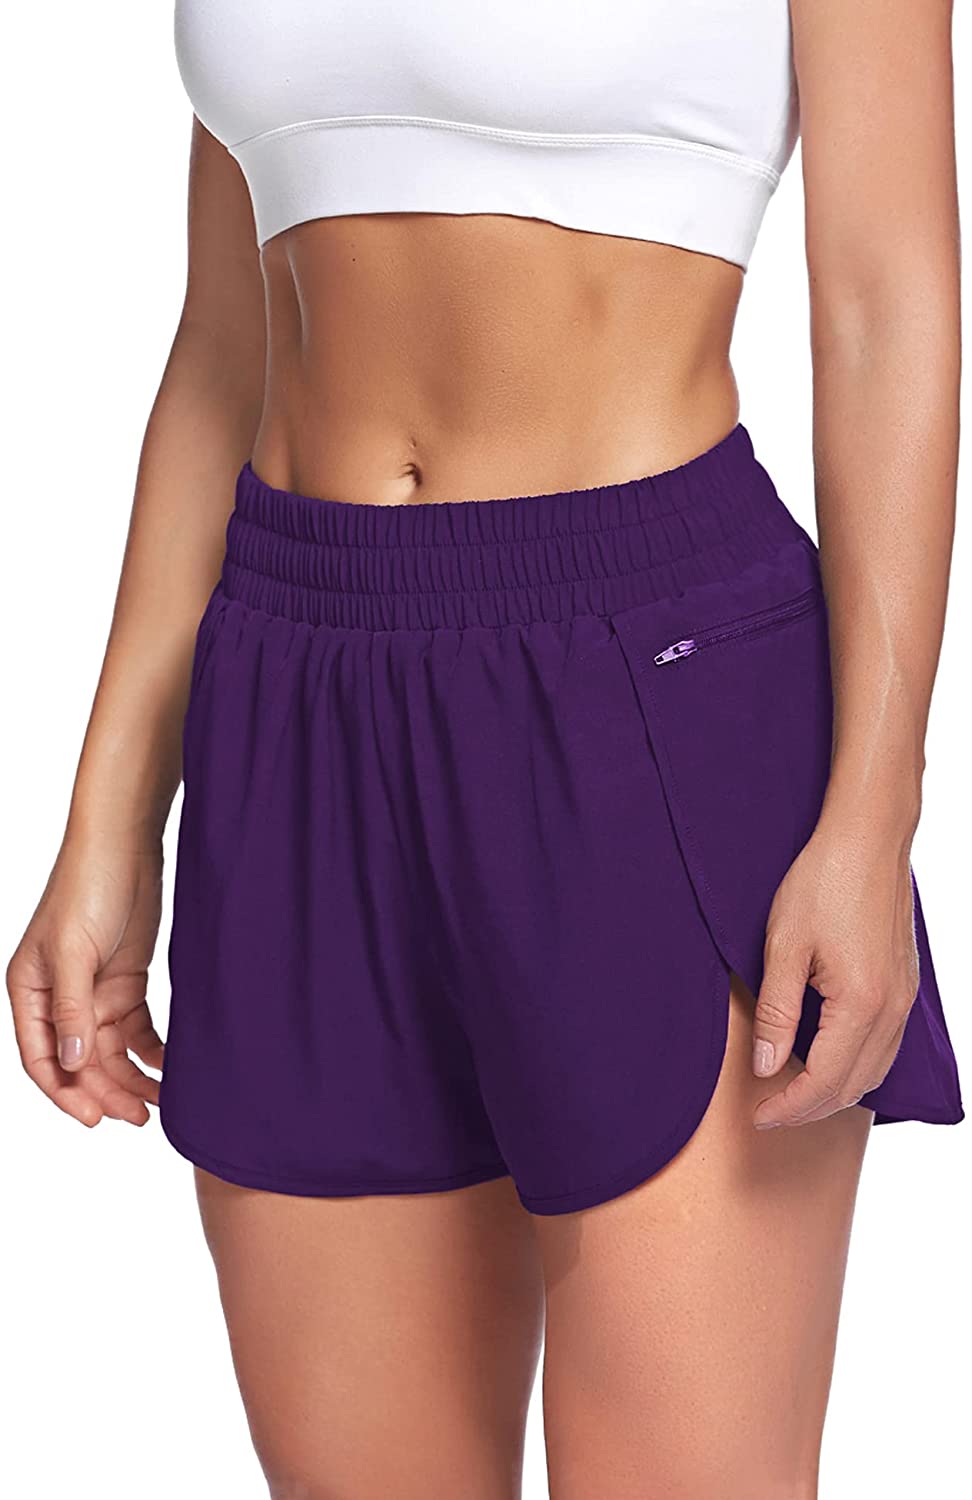 LaLaLa Womens Workout Shorts with Zip Pocket Quick-Dry Athletic Shorts  Sports El